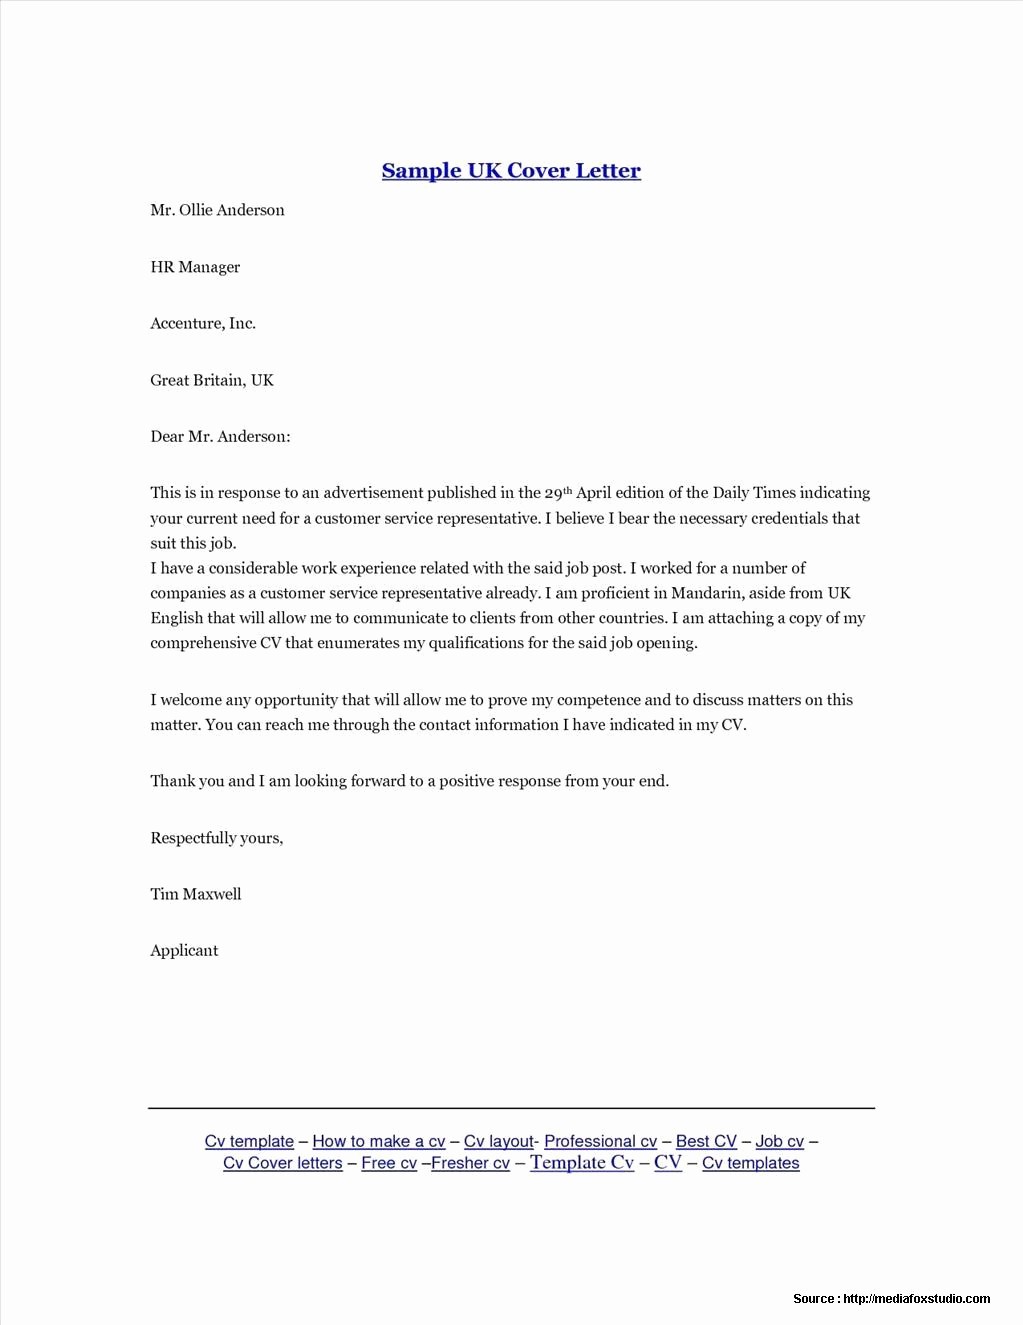 Cover Letter Templates for Resumes Beautiful Cover Letter Templates Free Uk Cover Letter Resume